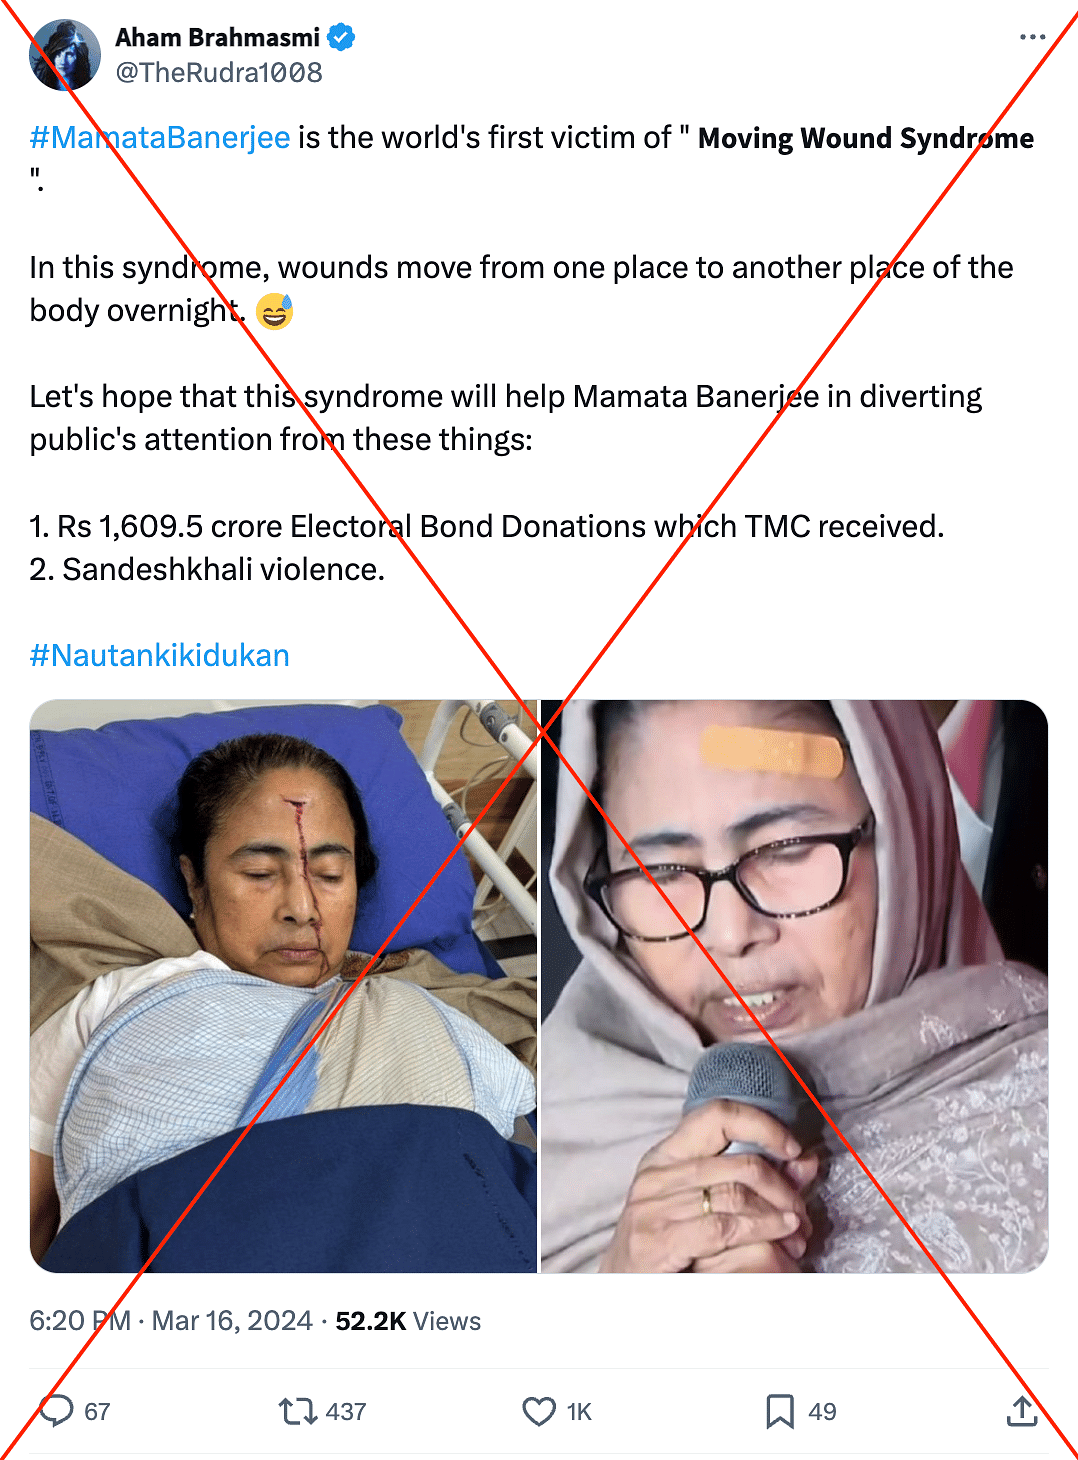 The photo of Mamata Banerjee with a bandage on her forehead dates back to January 2024 and is not recent.